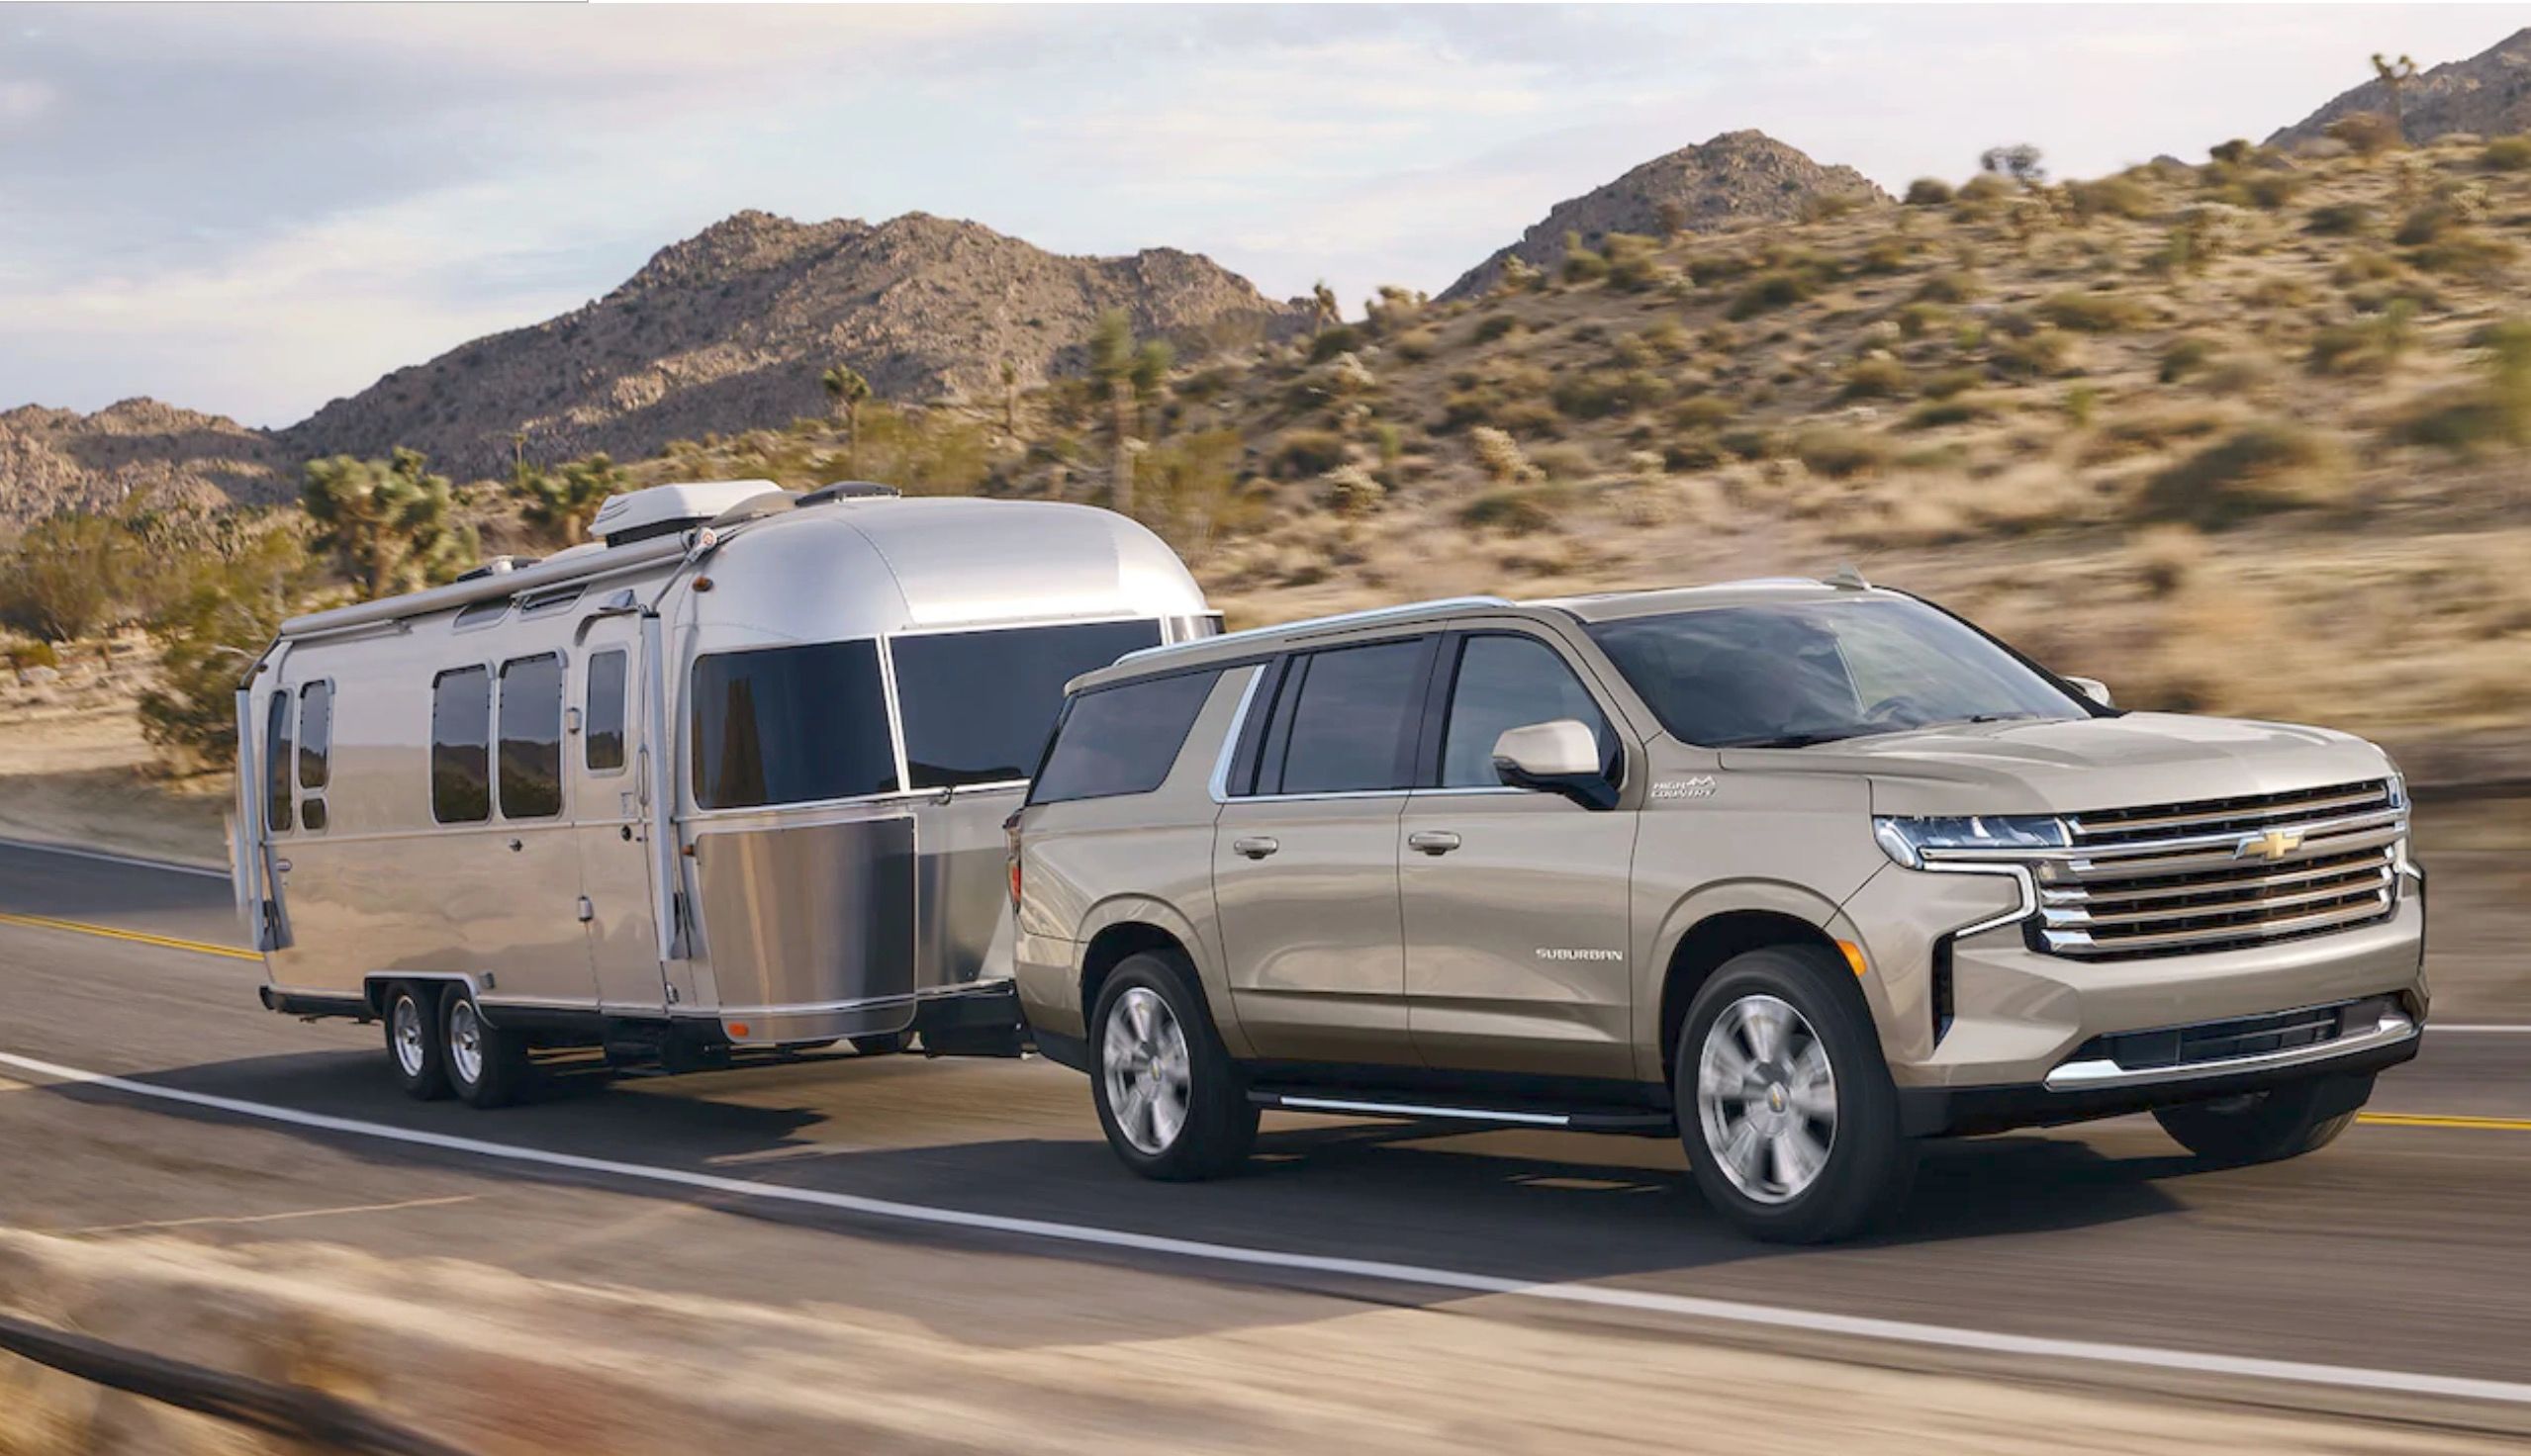 Chevrolet Suburban SUV Sport Utility Vehicle Truck Costs Facts Figures Specifications 2021